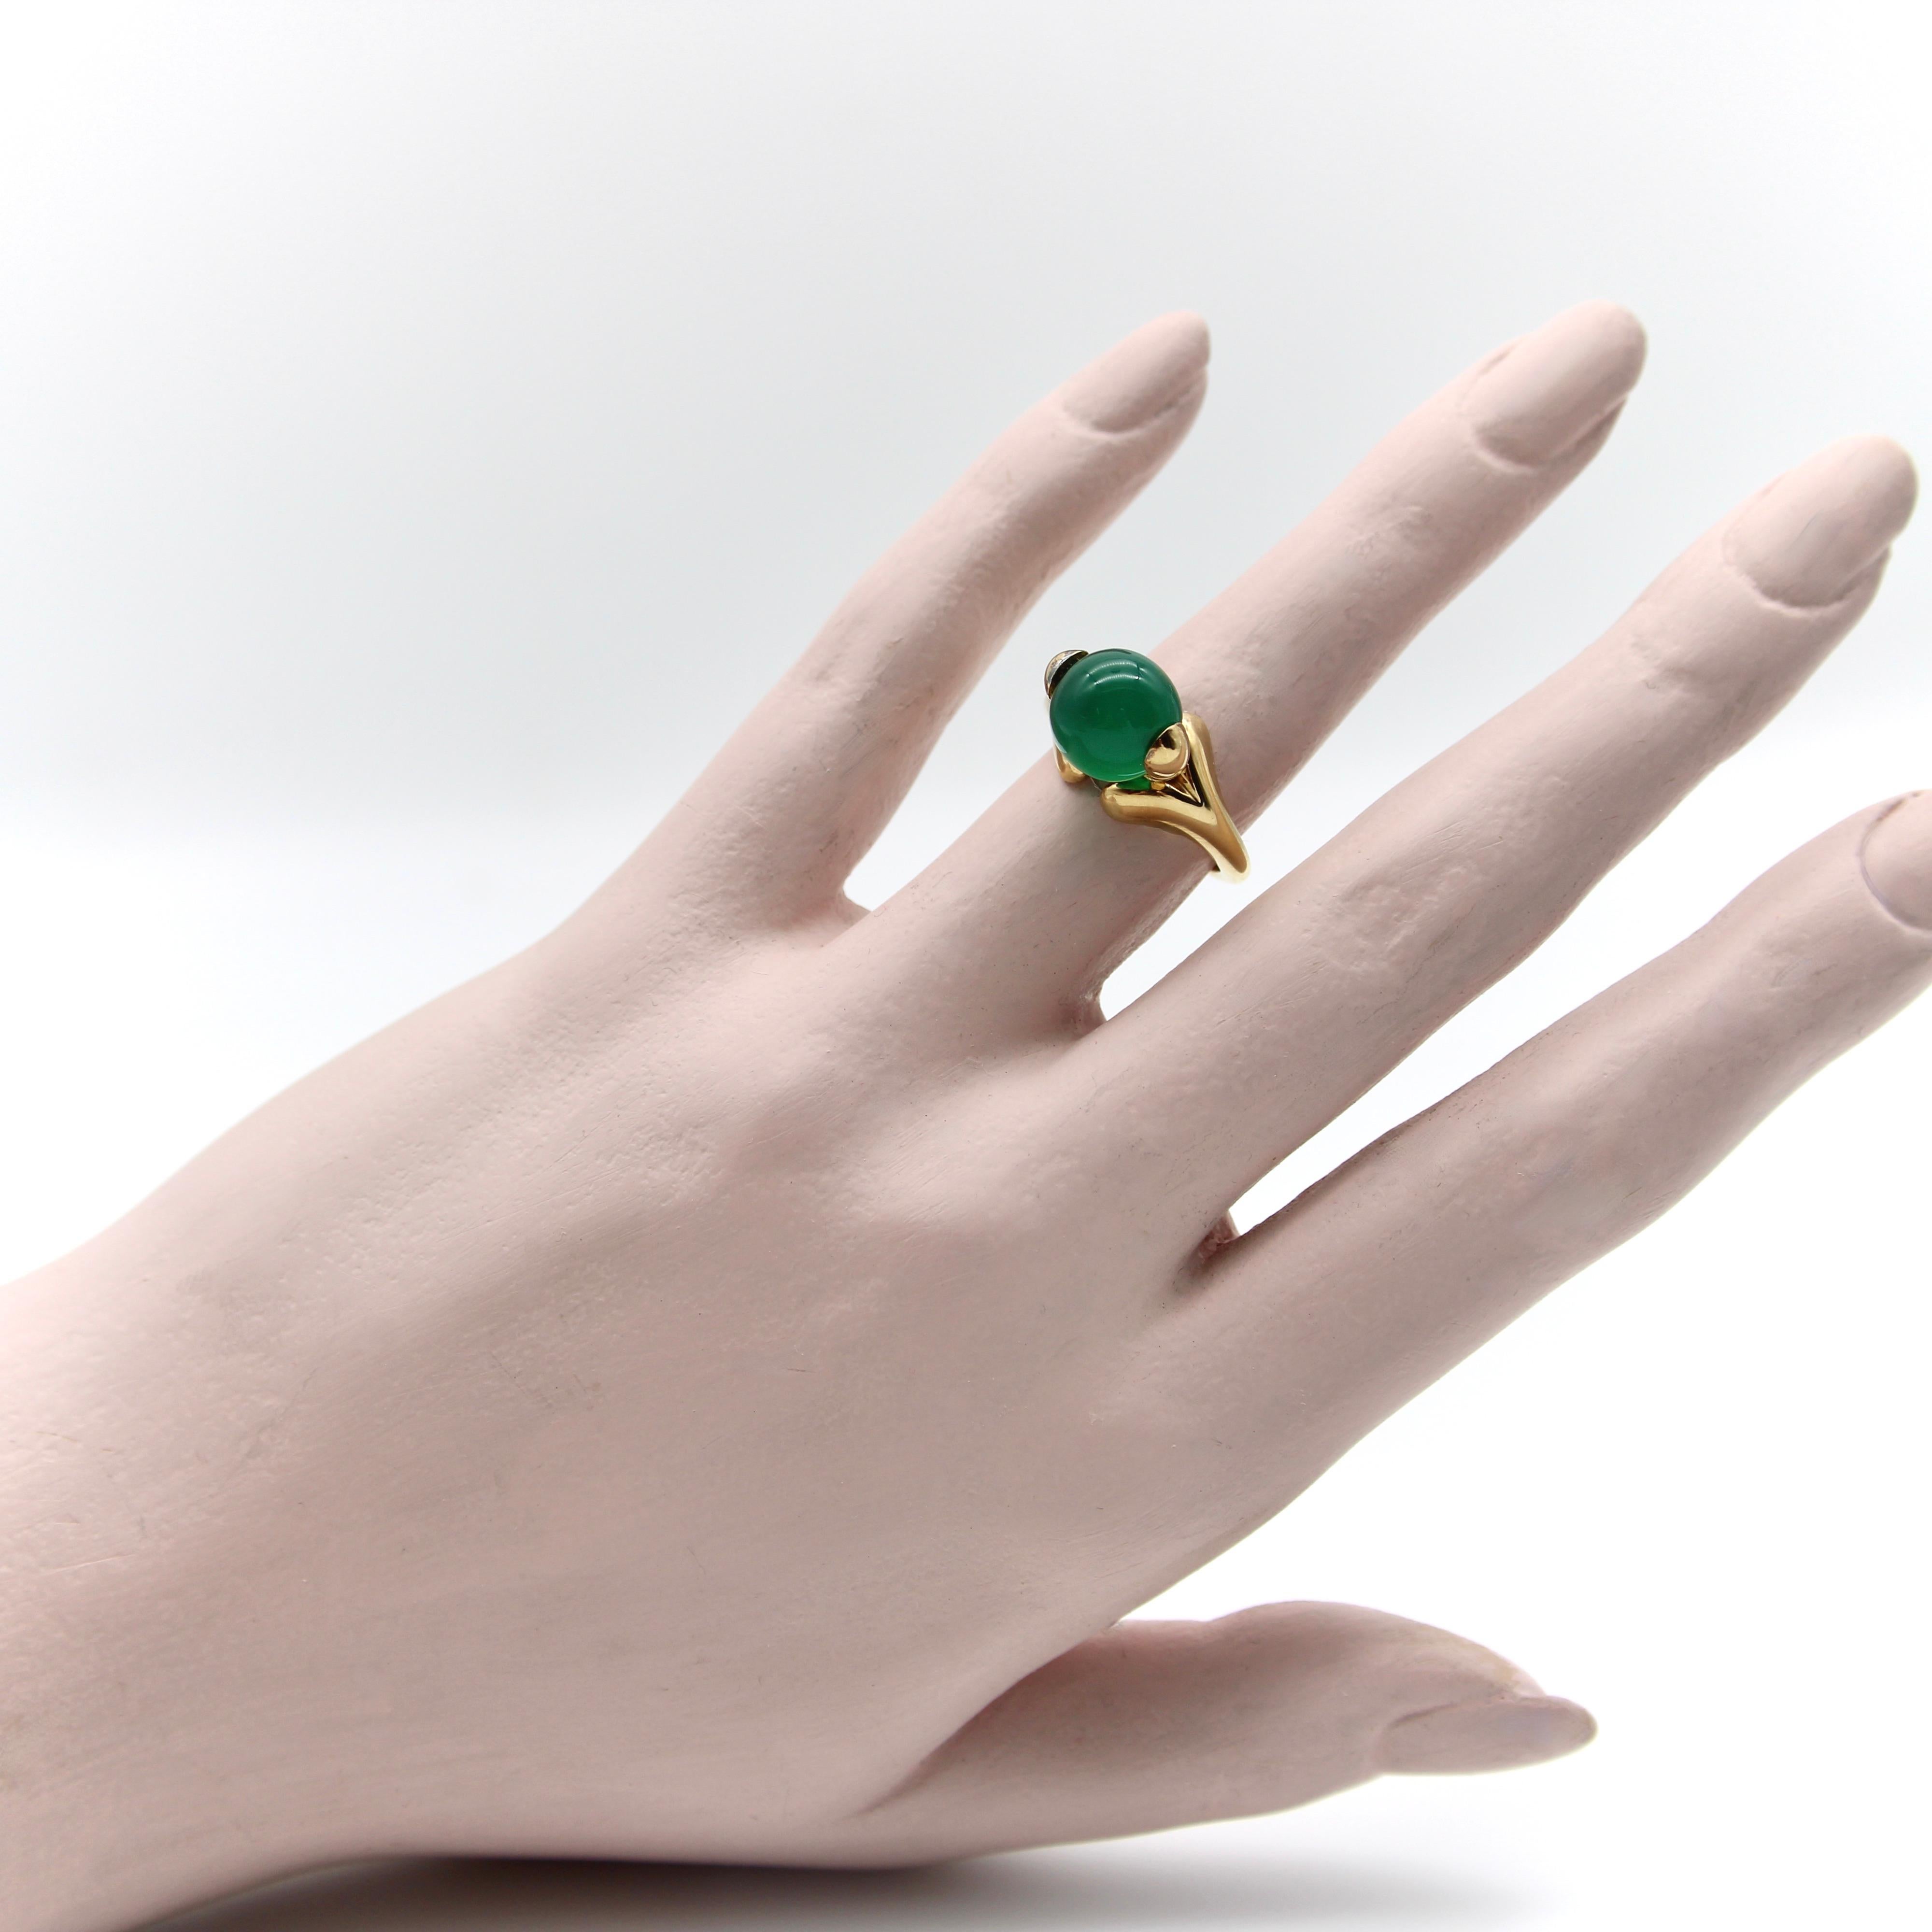 This 18k gold ring by Marina B features a pierced chalcedony bead that spins on the top in a playful and bold fashion. The ring is hallmarked Marina B, 750, with the stye # 180033. We’ve been unable to find many rings similar to this one. The ring